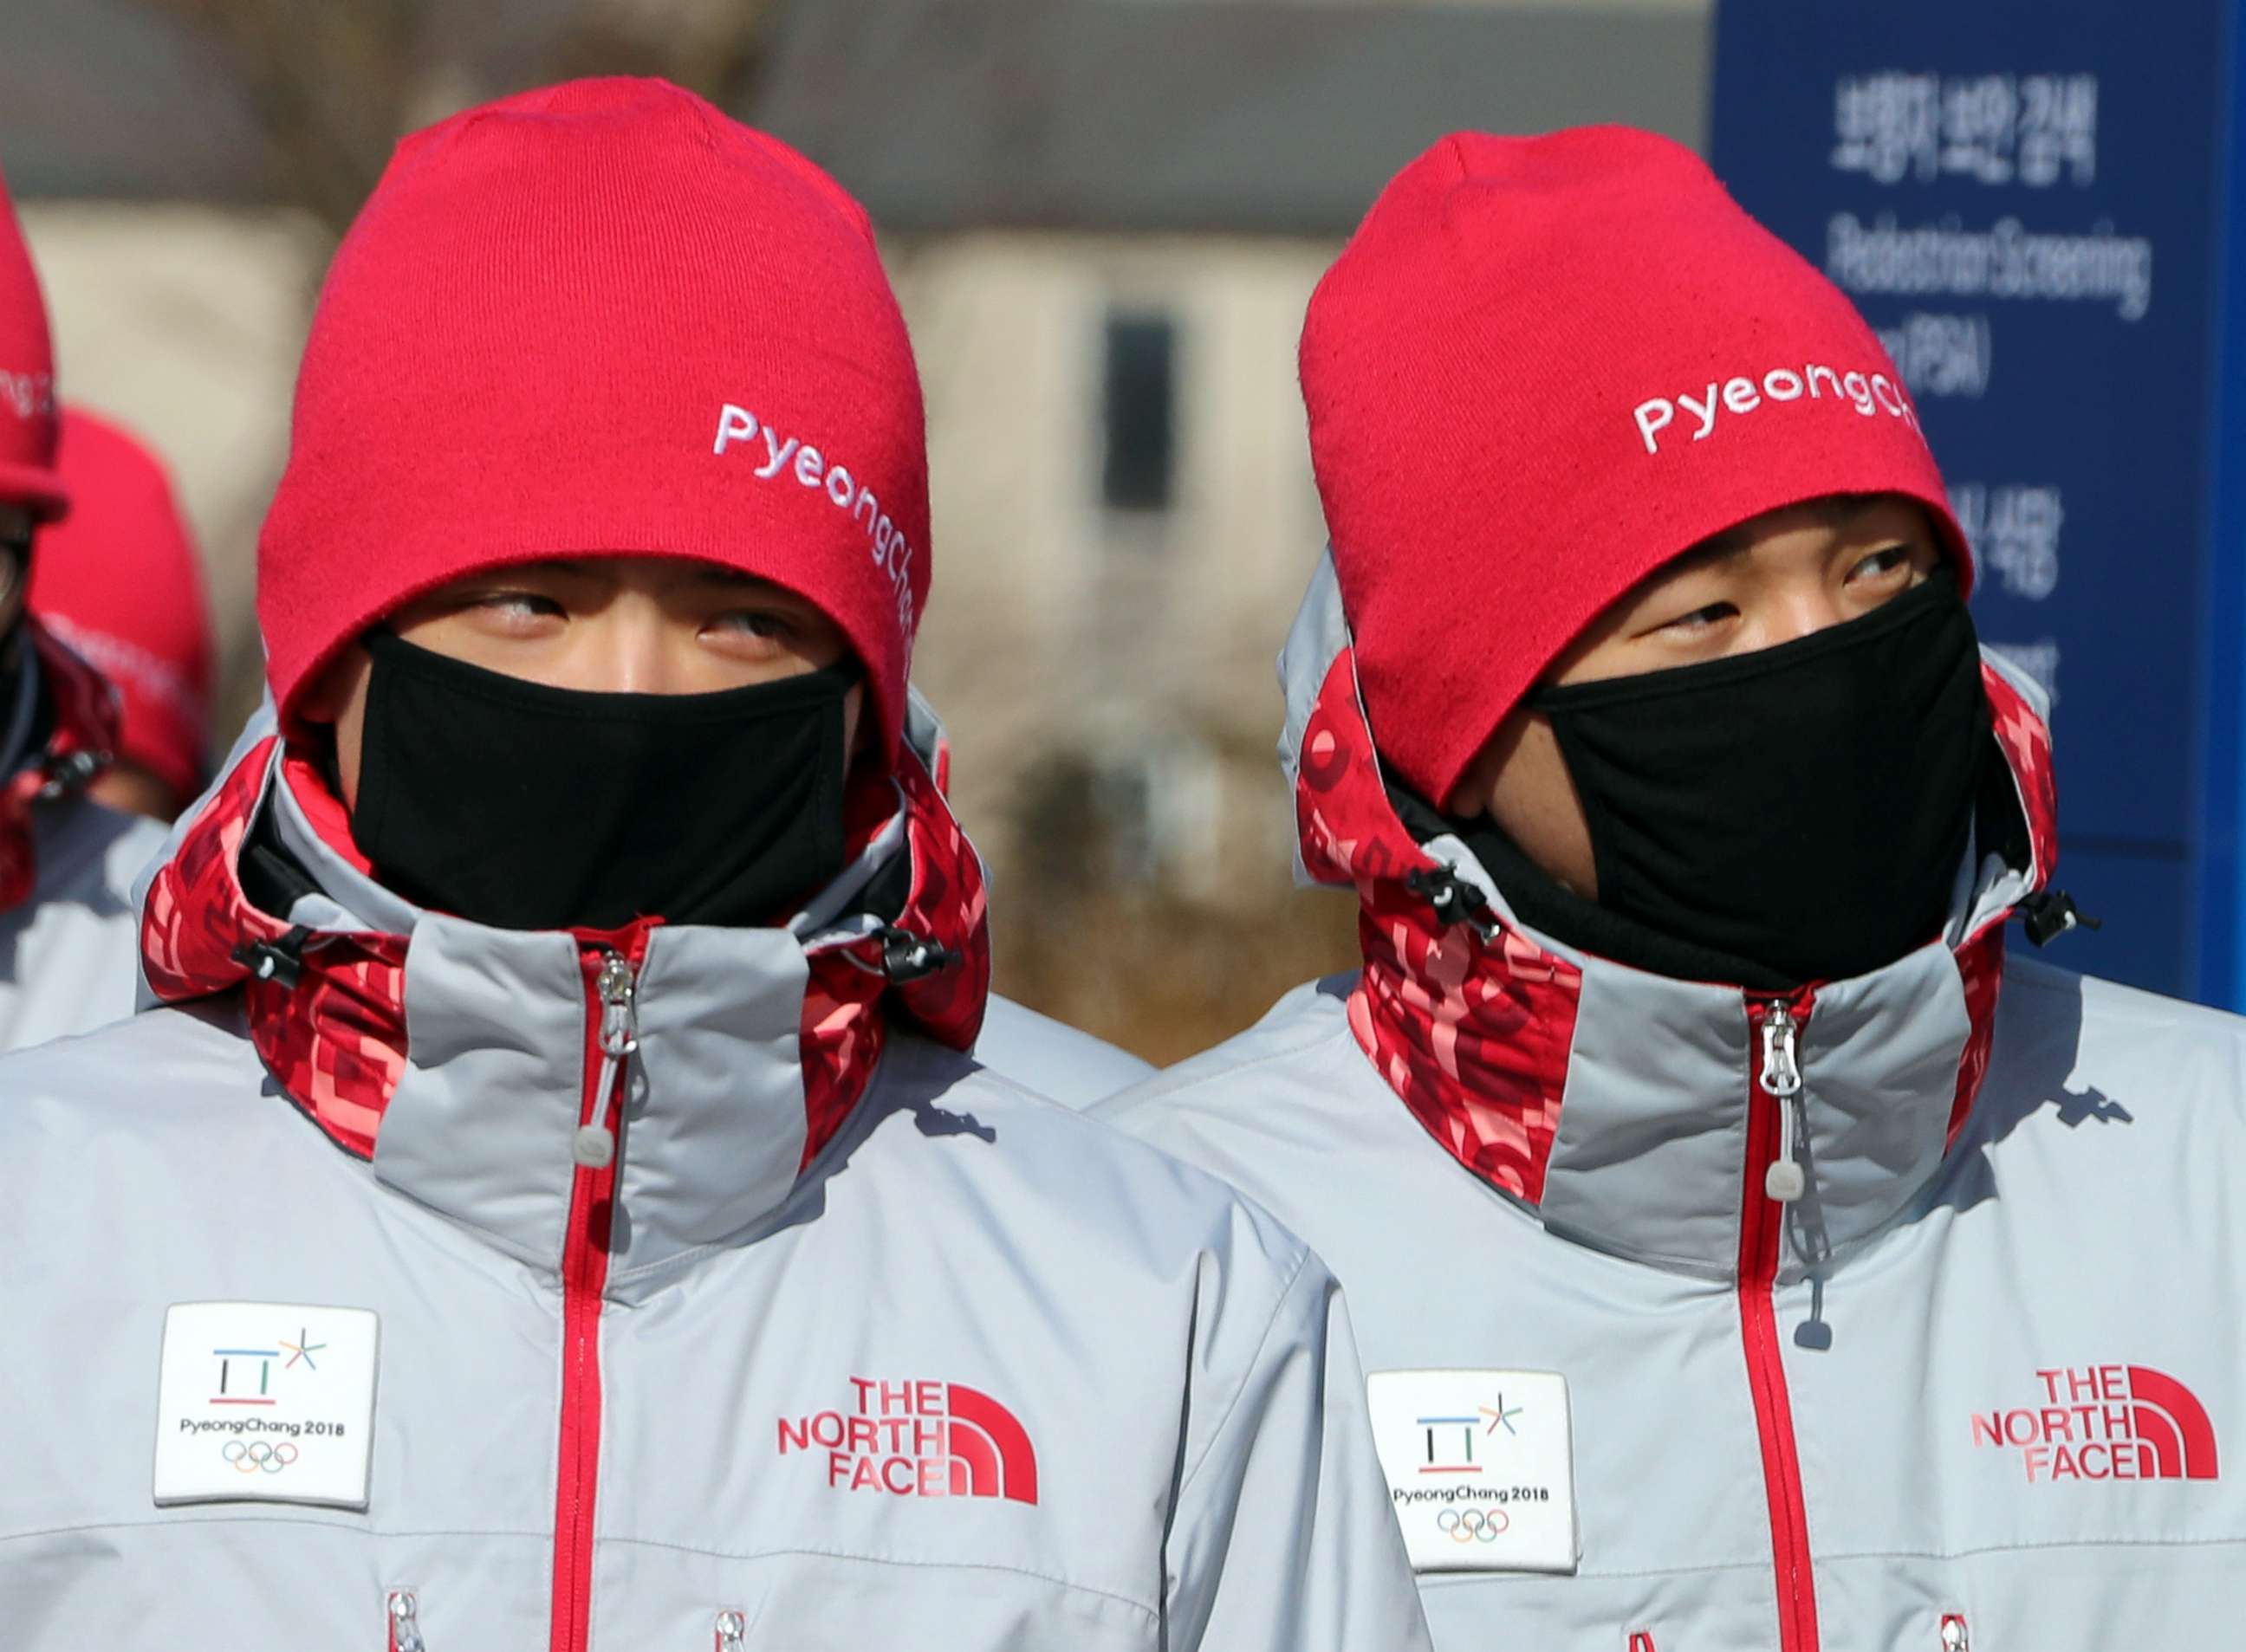 PHOTO: Volunteers protect their faces from the cold at the Olympic stadium of the Pyeongchang Winter Olympic Games in Pyeongchang, South Korea Feb. 7, 2018.